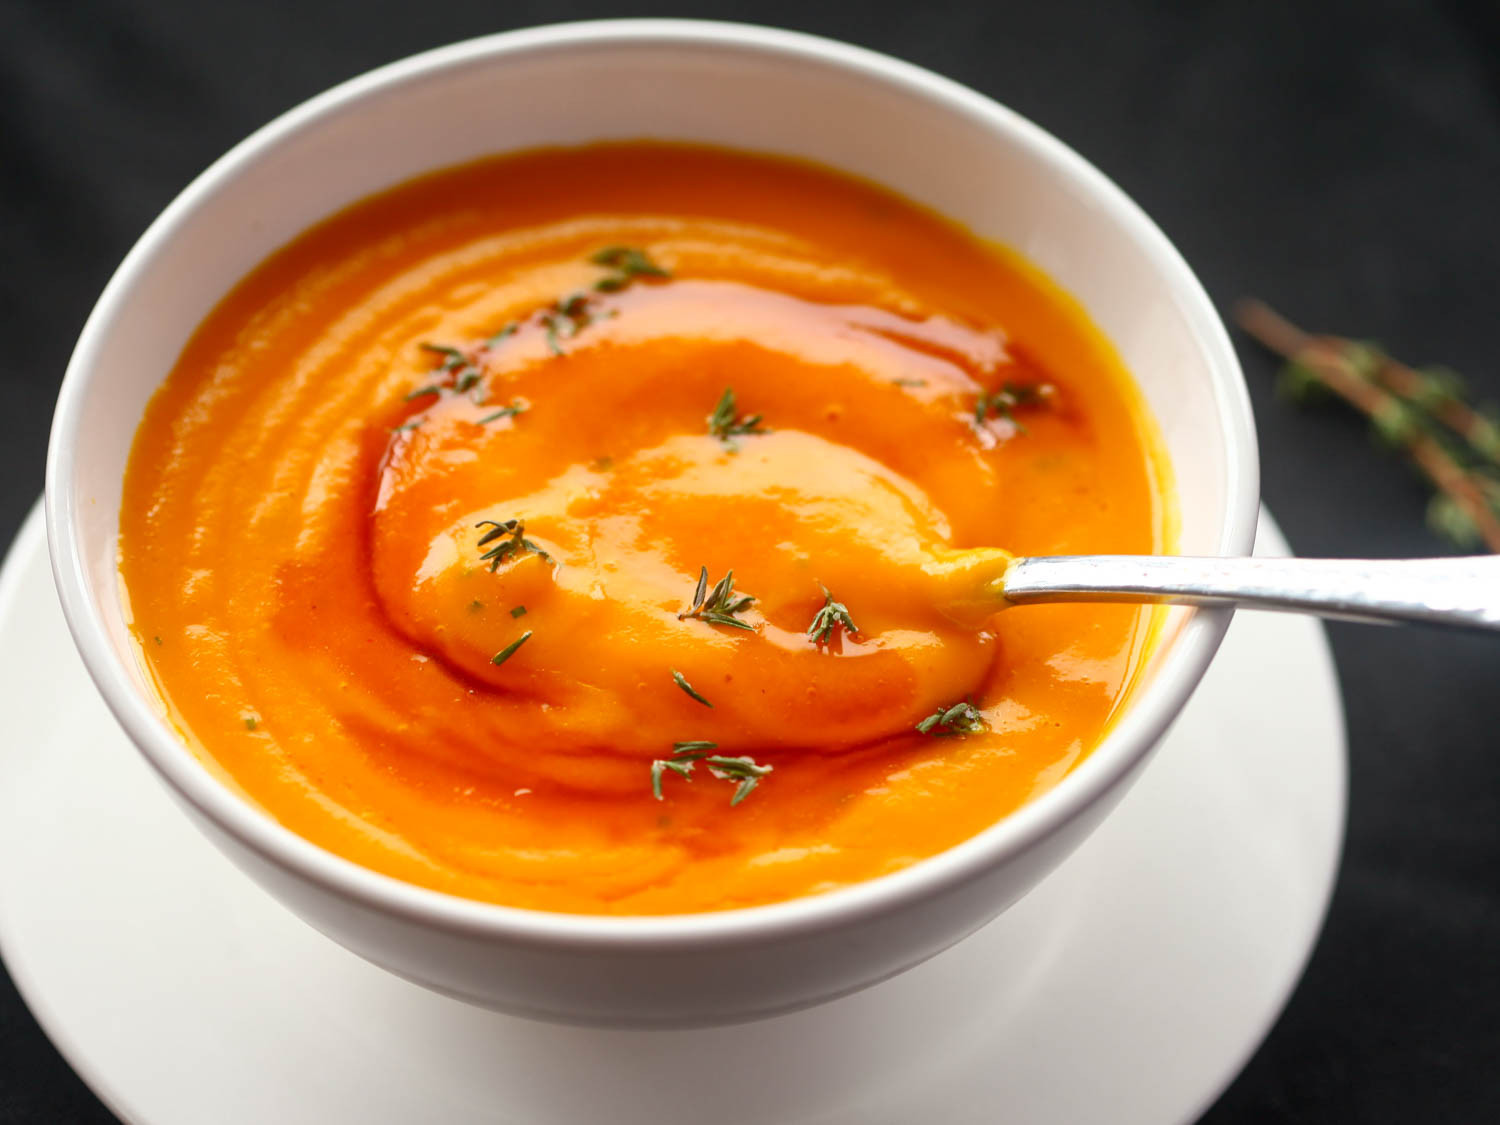 Thanksgiving Pumpkin Recipes
 Roasted Pumpkin Soup With Brown Butter and Thyme Recipe